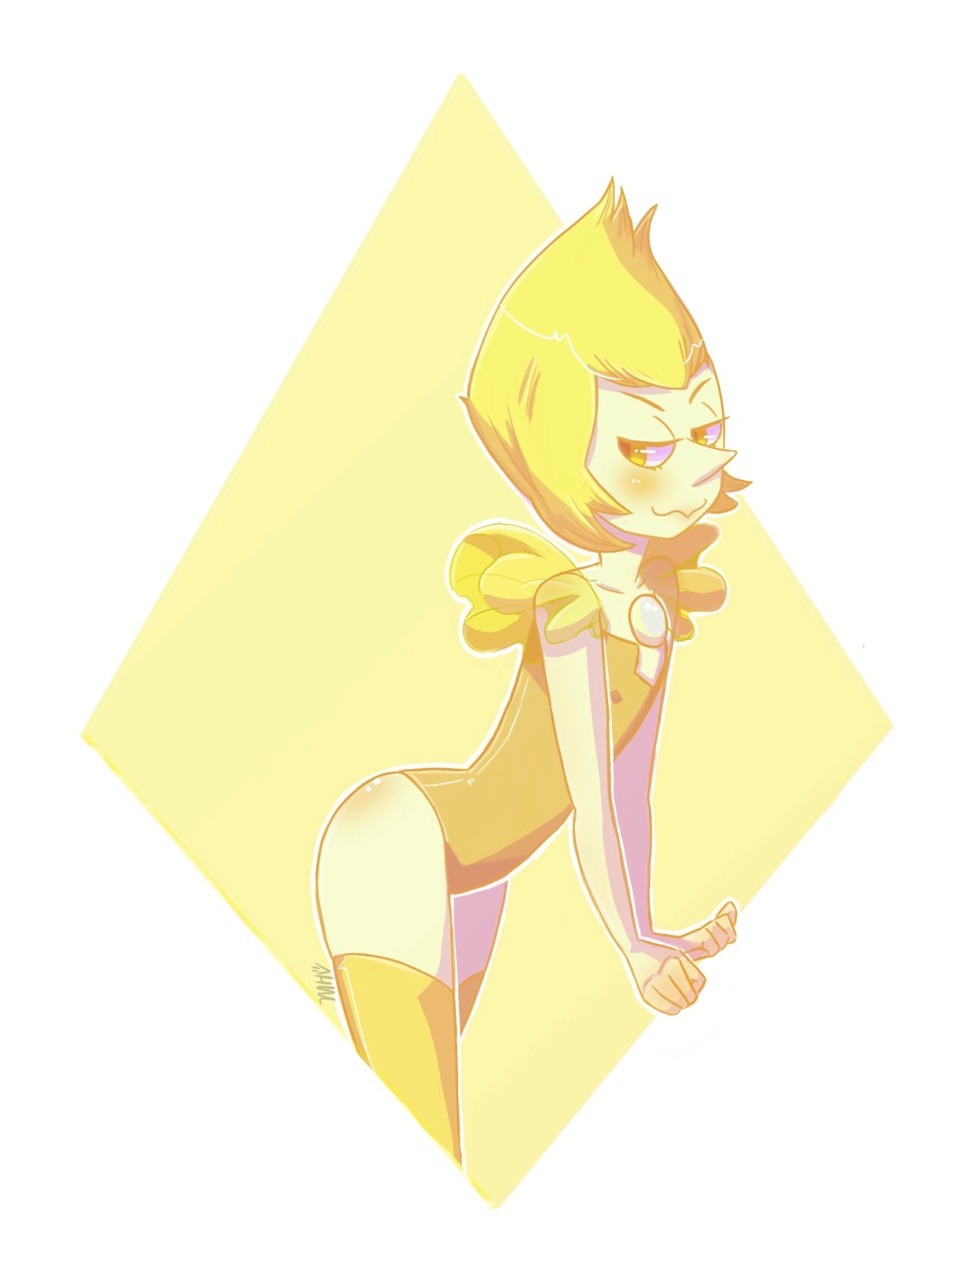 I can’t believe I finally finished this. So happy with how it came out! Yellow pearl is the cutest pearl!